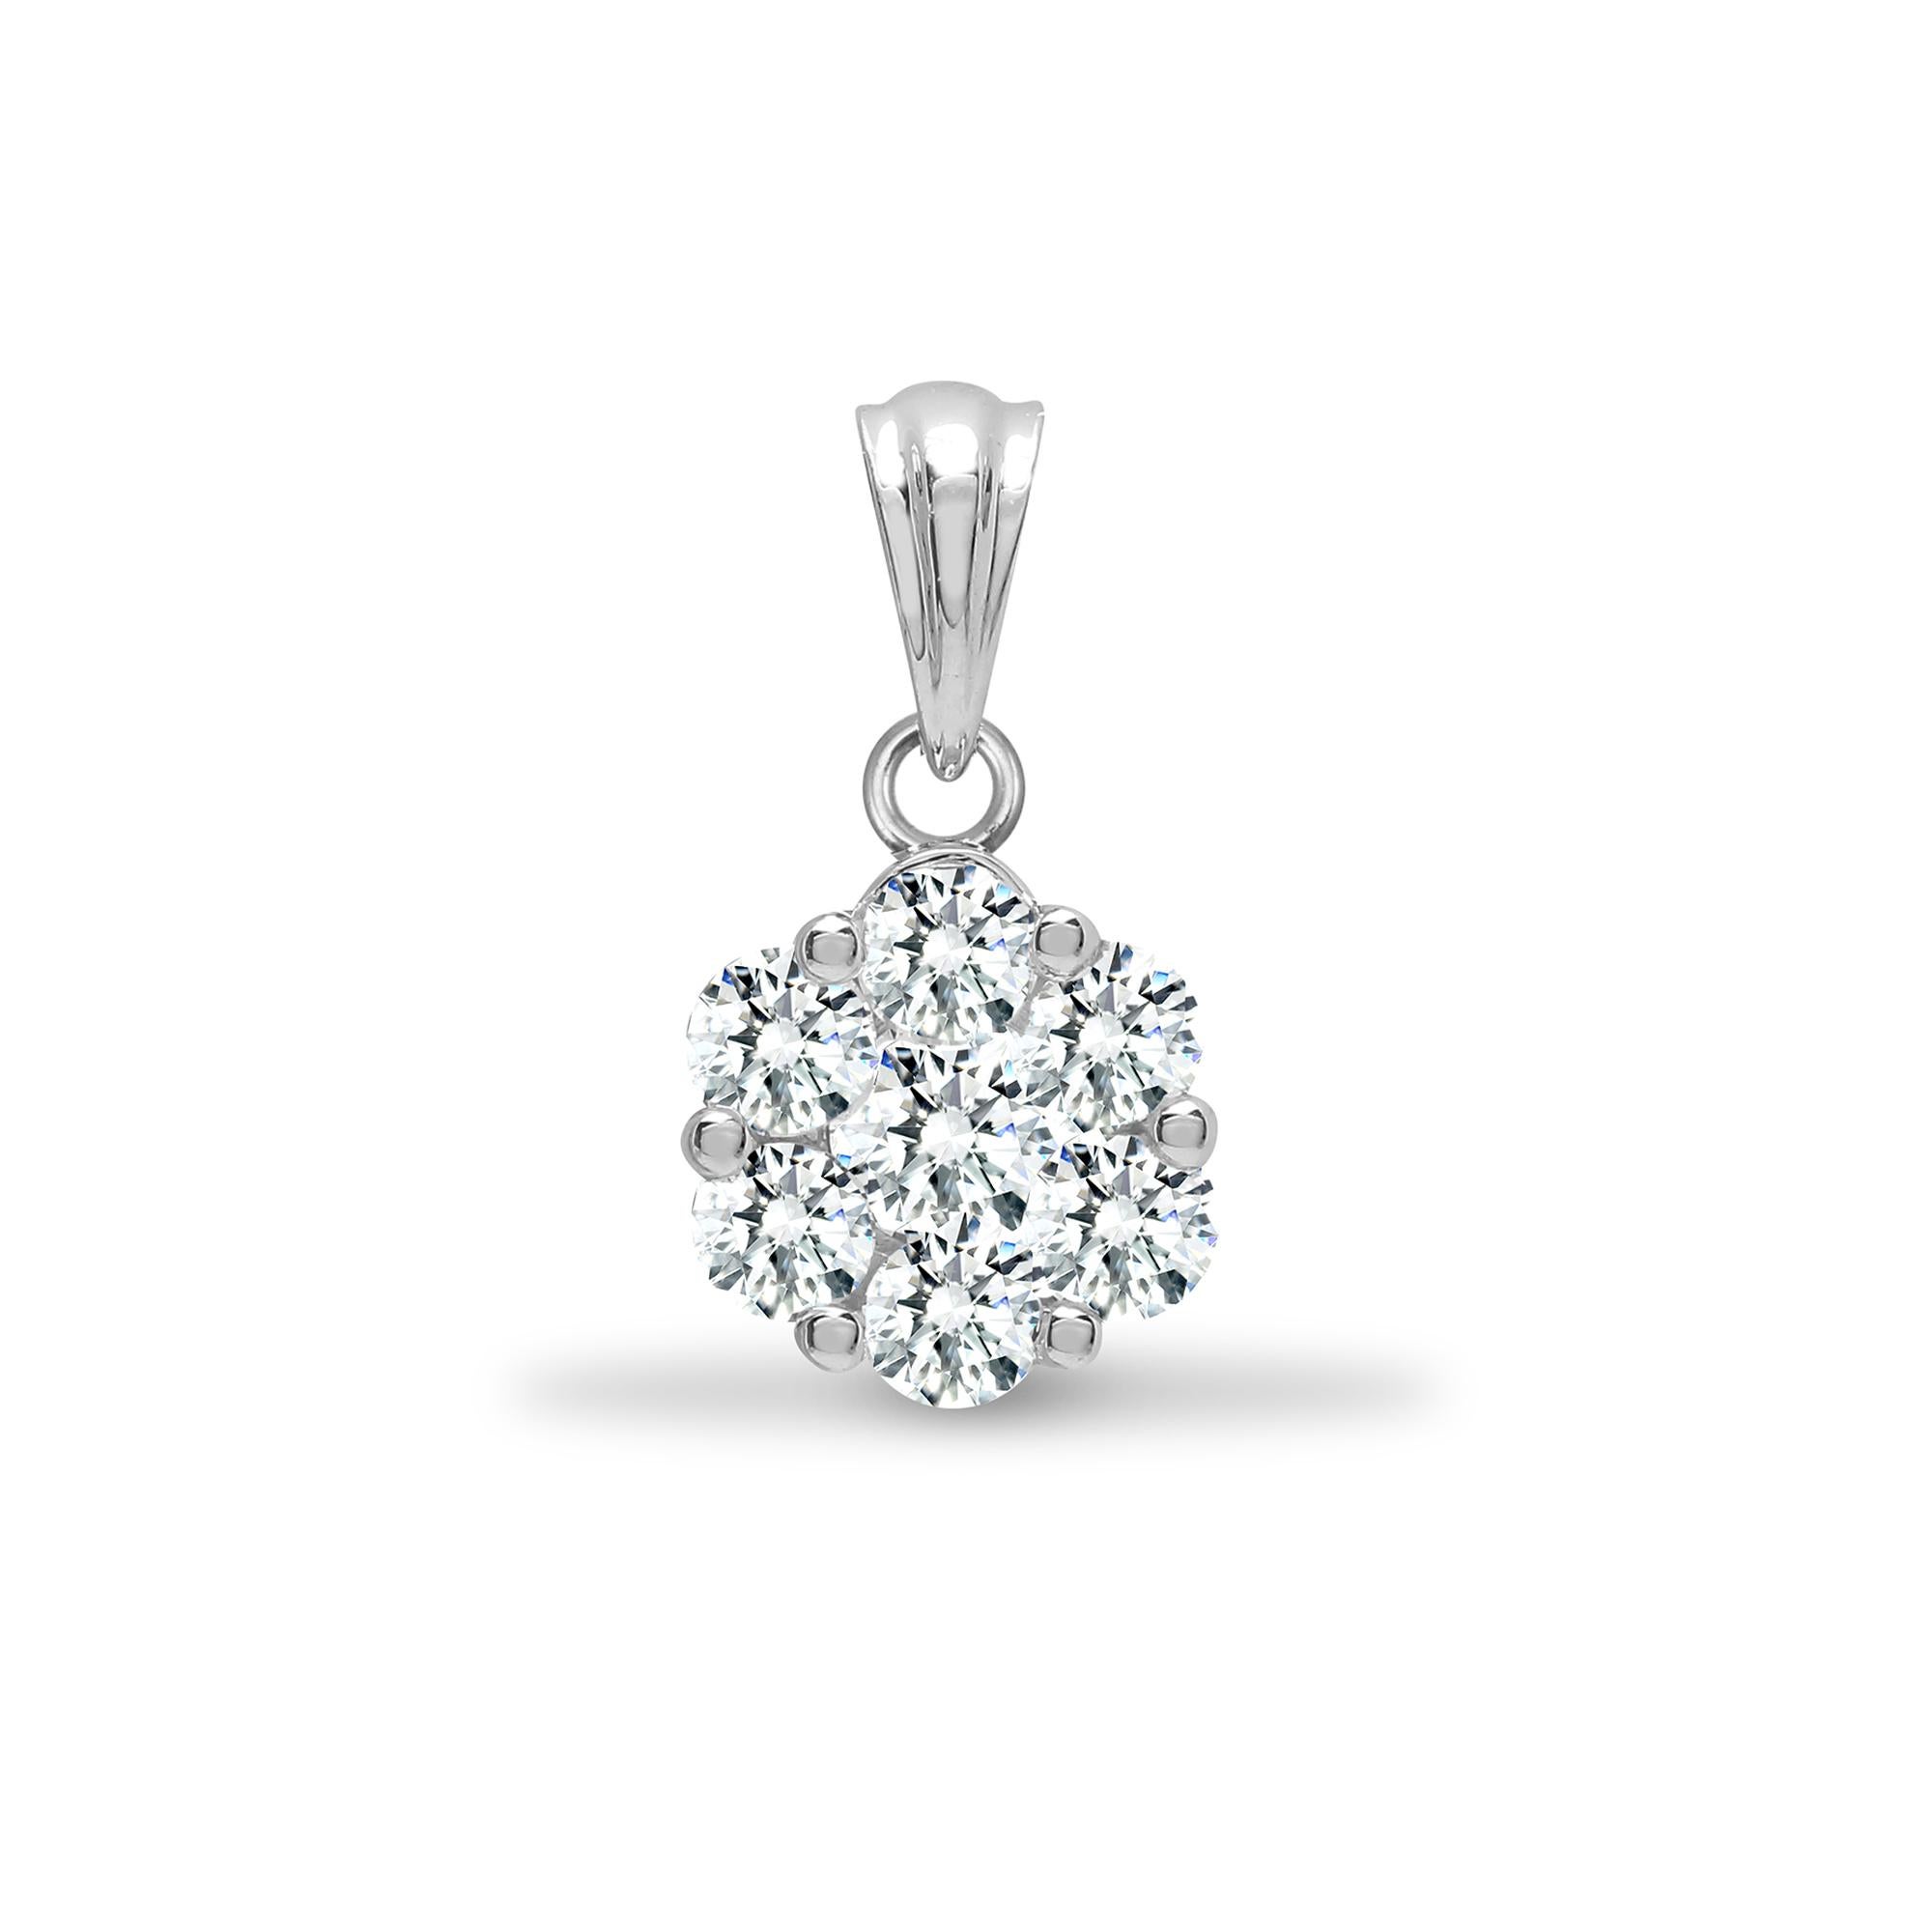 This Beautiful 0.33 Carat Flower design Cluster Diamond pendant features 7 round brilliant cut natural diamonds Color G - H, Clarity VS - SI1 Round White Diamonds. Comes with a stunning white gold necklace chain all set in 18 Karat white gold,